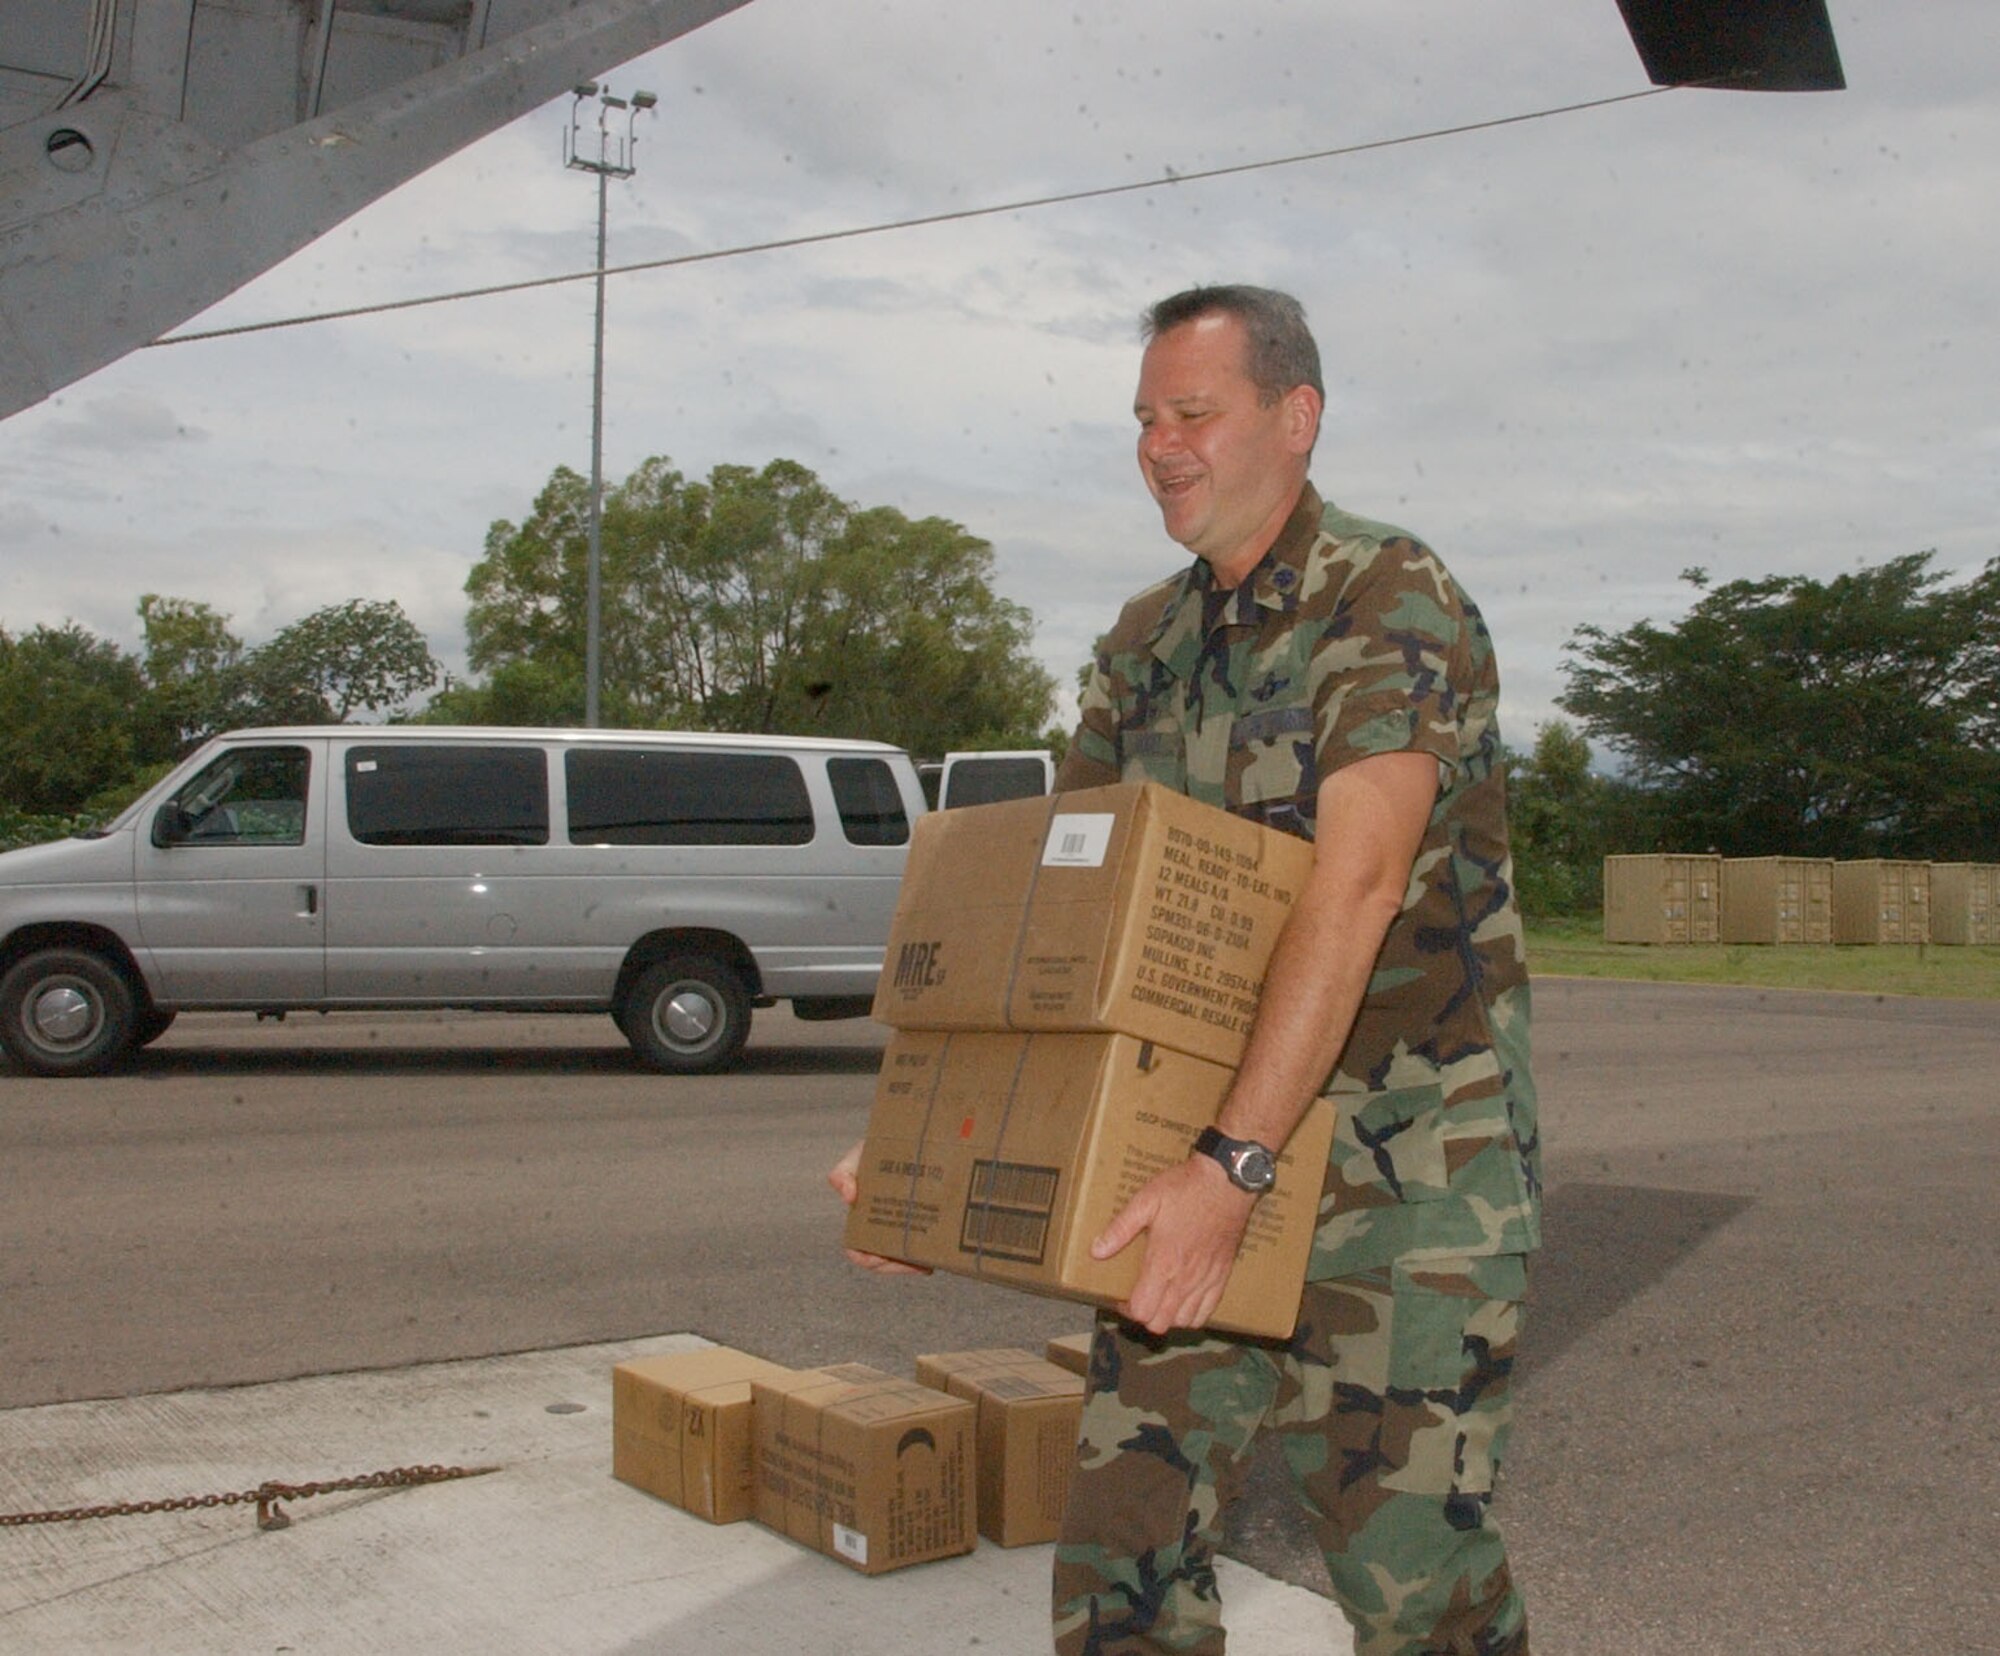 Air Force Lt. Col. Randall Vogel loads meals ready to eat onto a CH-47 Chinook helicopter Aug. 21 for troops deploying from Honduras.  Approximately 25 Airmen and Soldiers from Soto Cano Air Base left Honduras to assess the damage caused by Hurricane Dean in Belize and assist Belize in recovery efforts.  U.S. Air Force photo by Martin Chahin.